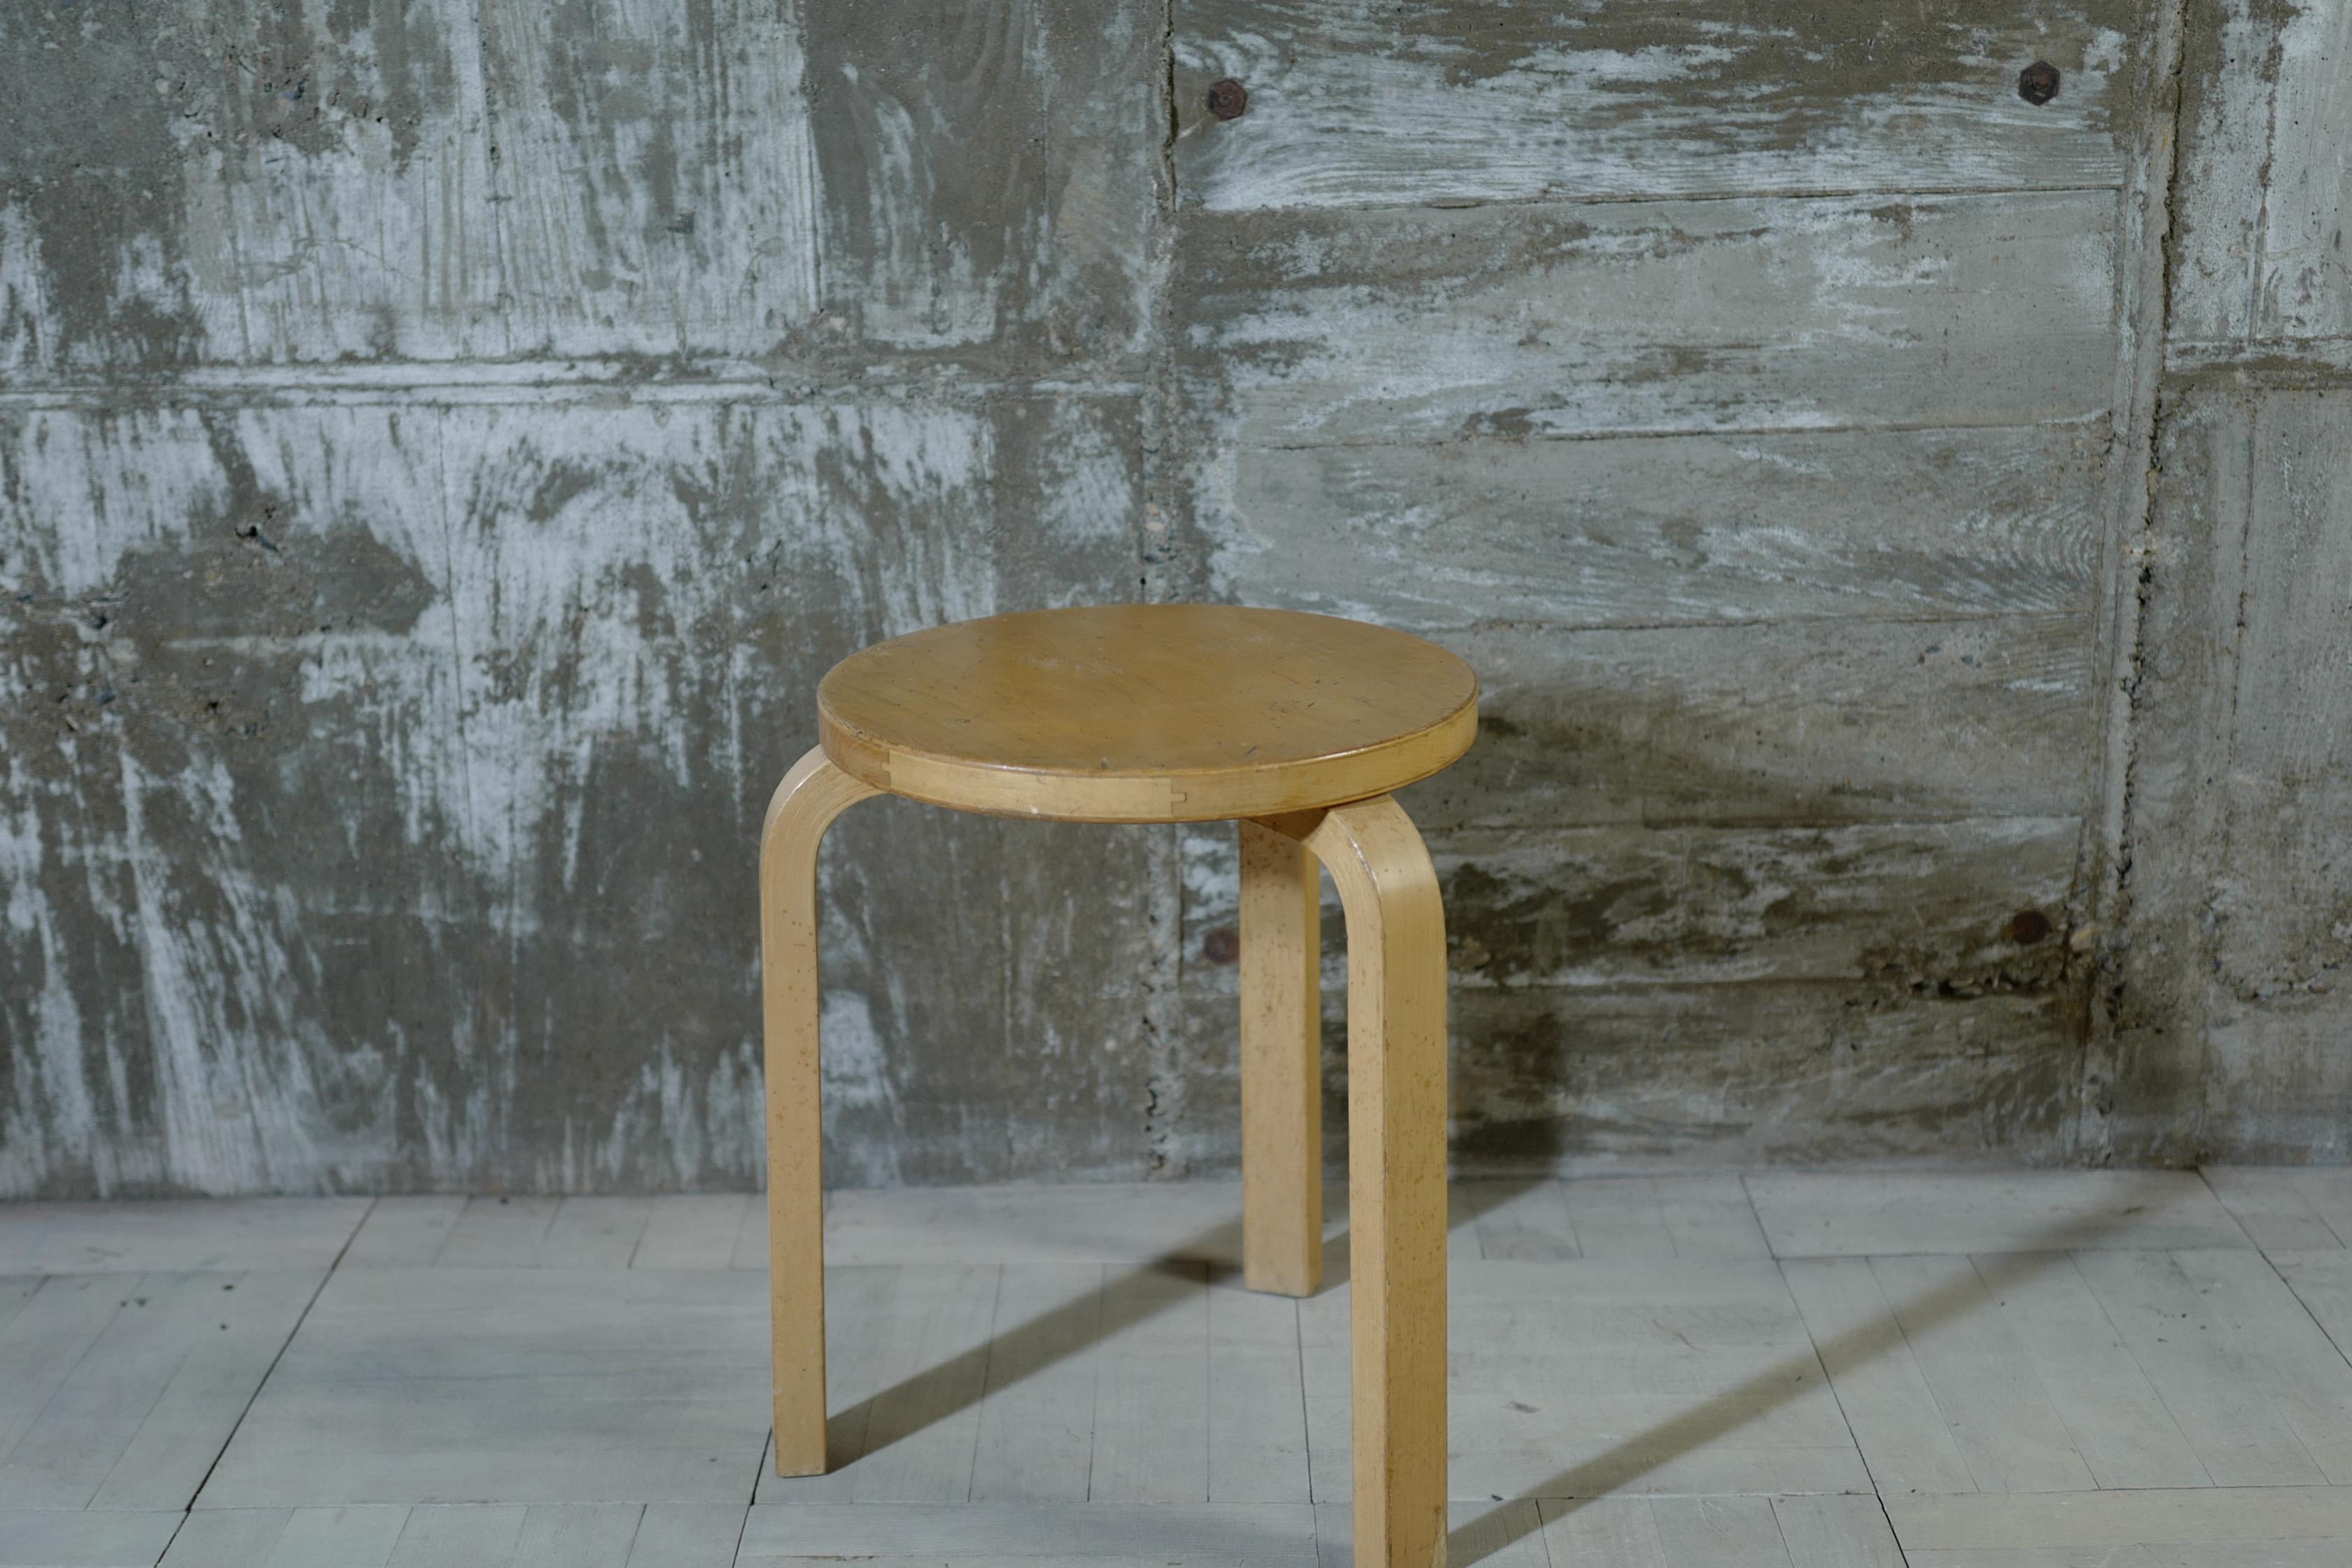 Designed by Alvar Aalto.
This stool60 was manufactured in the 1950s.